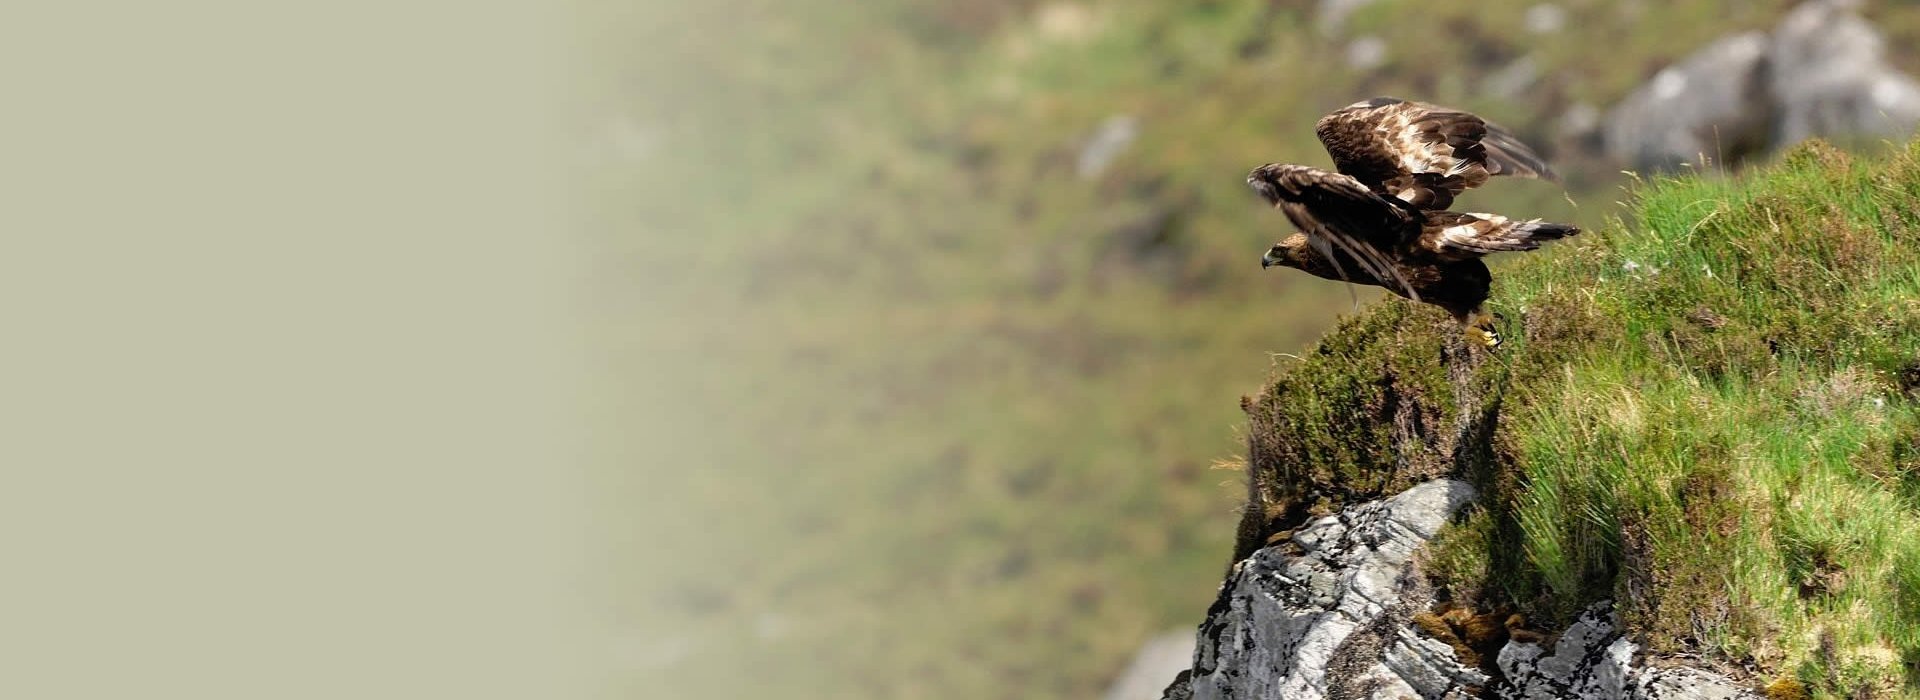 A golden eagle taking off from a cliff ledge